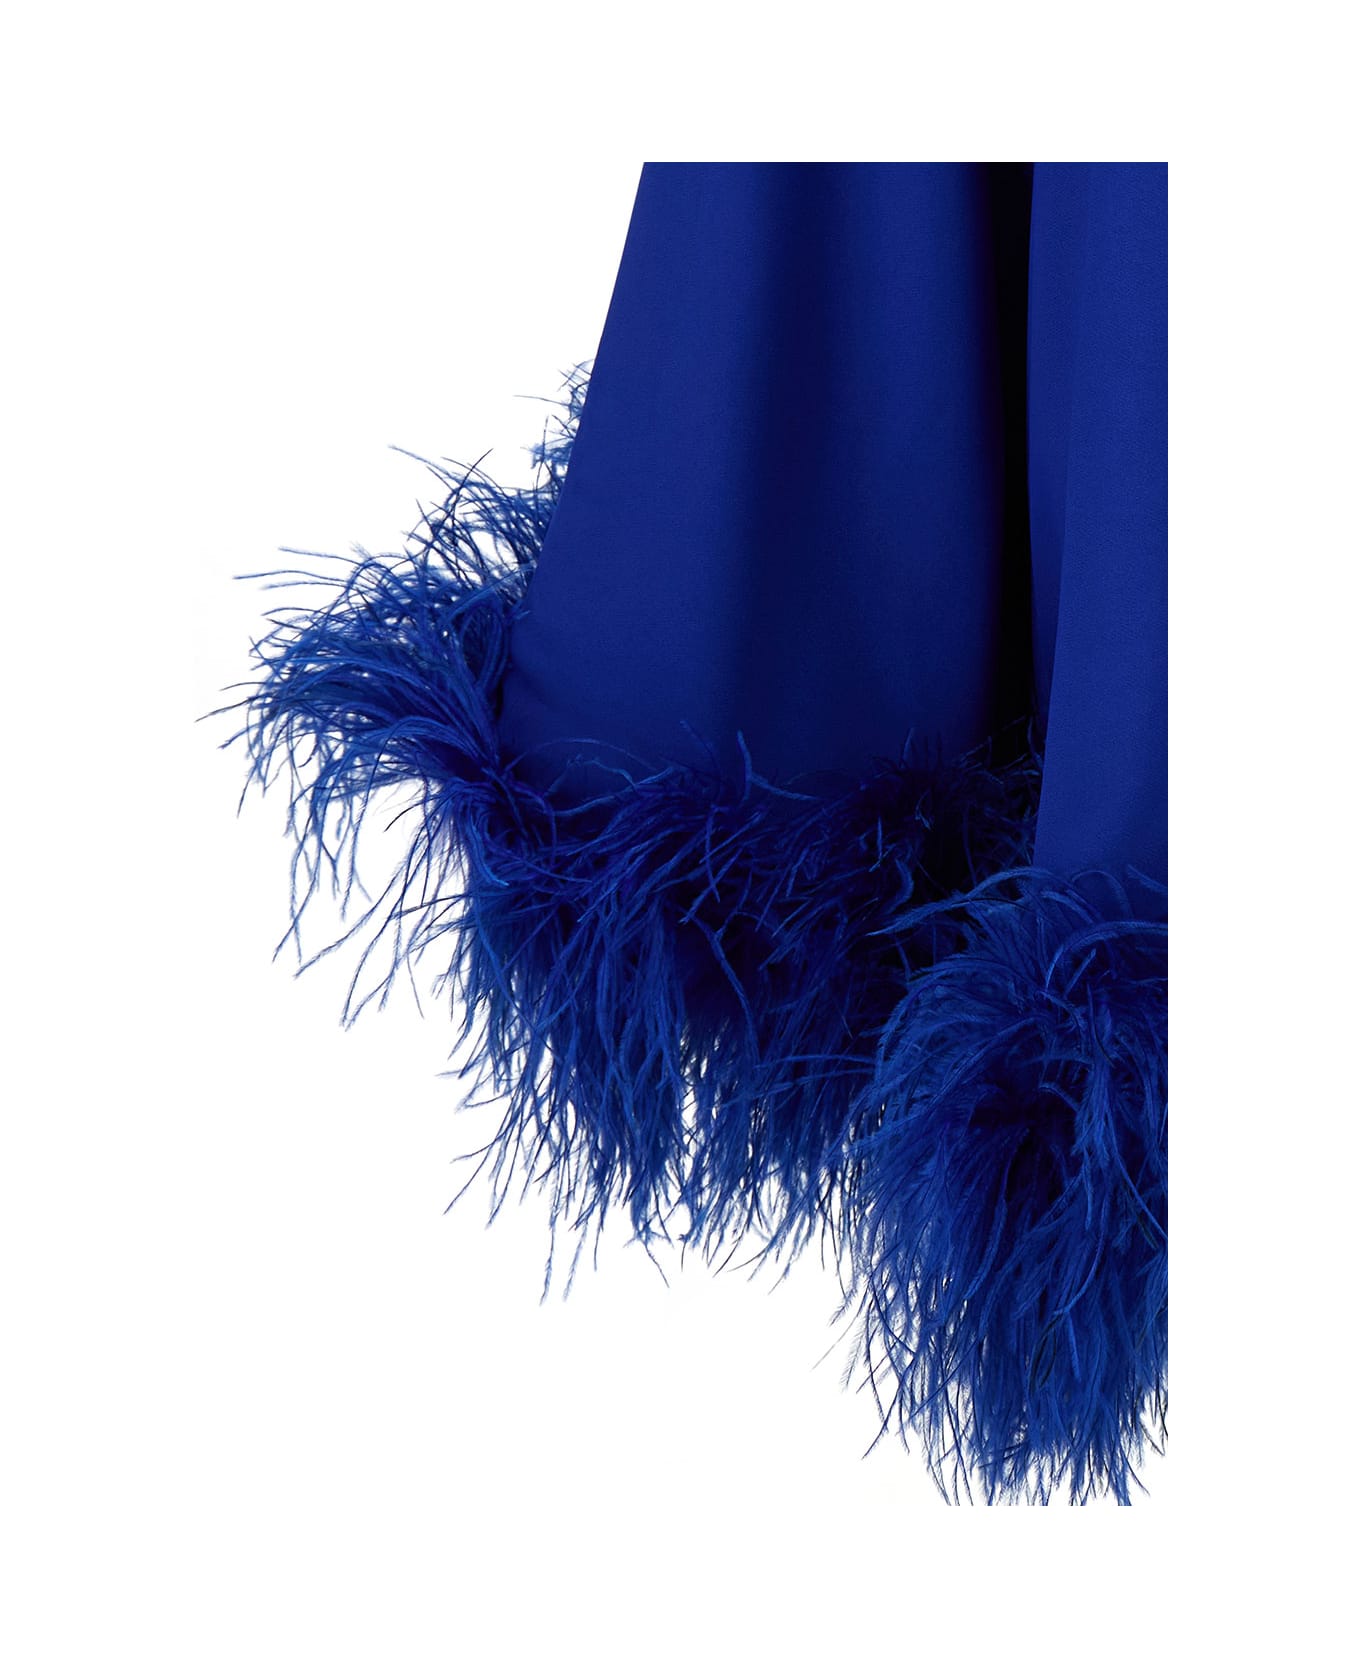 Taller Marmo 'ubud' Mini Blue One-shoulder Dress With Feather Trim In Acetate Blend Woman - Blu